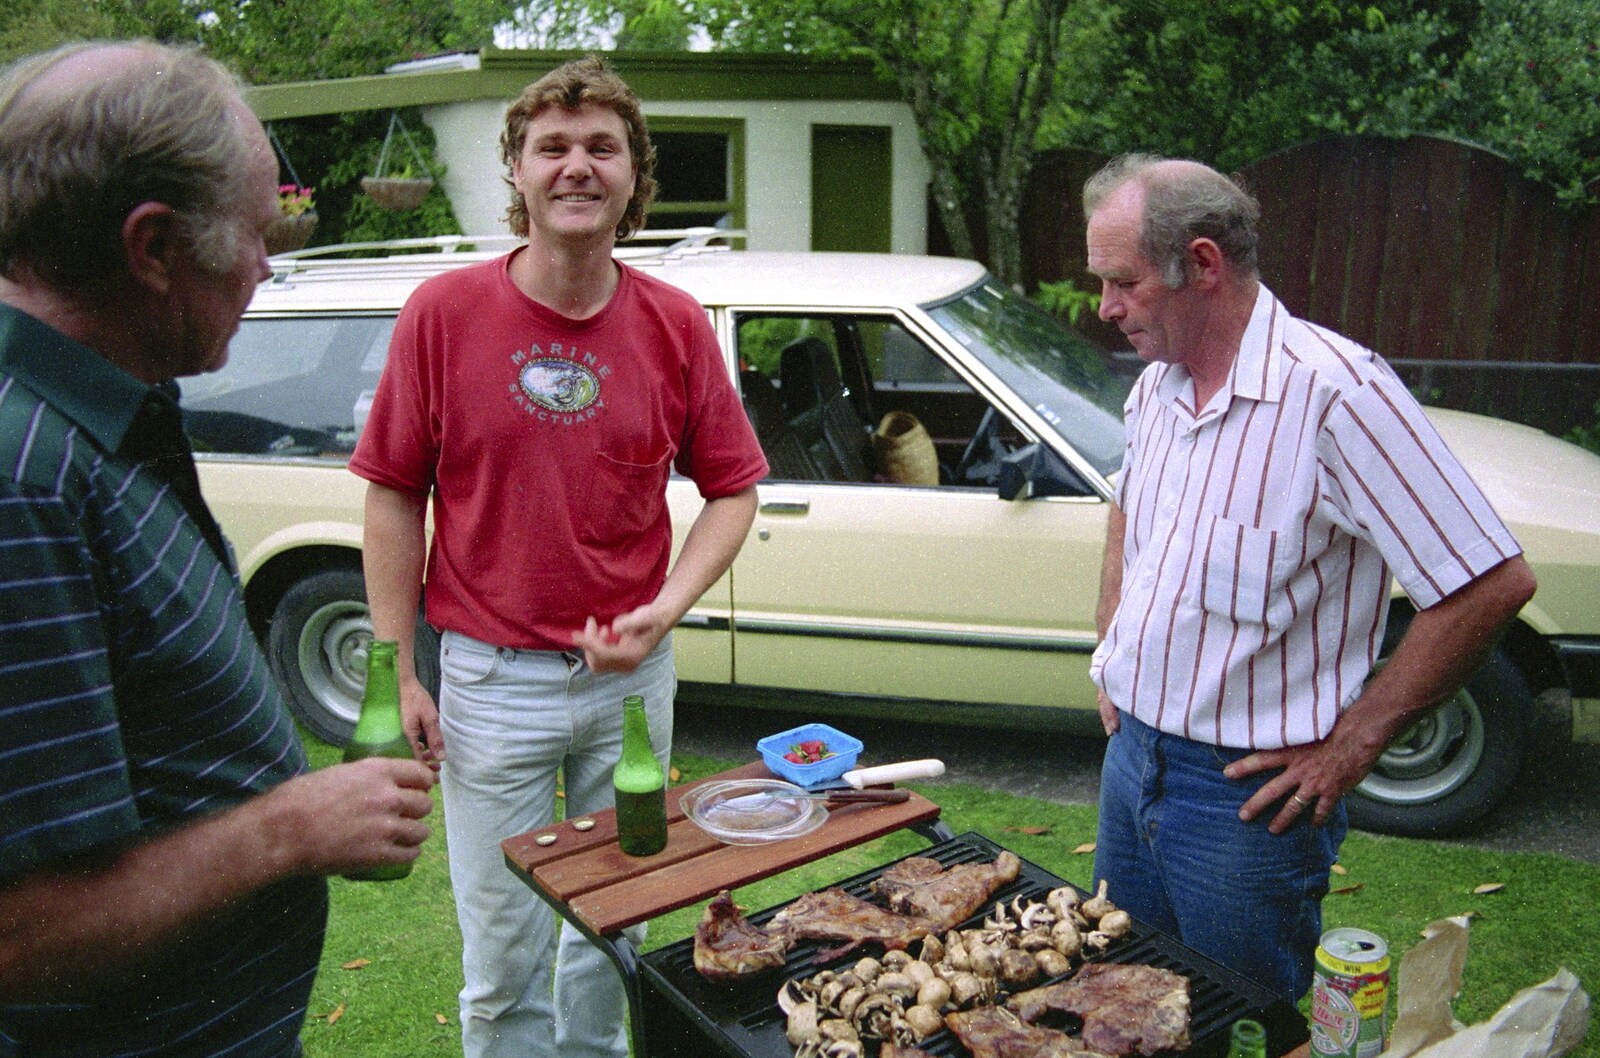 Steve grins as Clive inspects the barbeque from Ferry Landing, Whitianga, New Zealand - 23rd November 1992